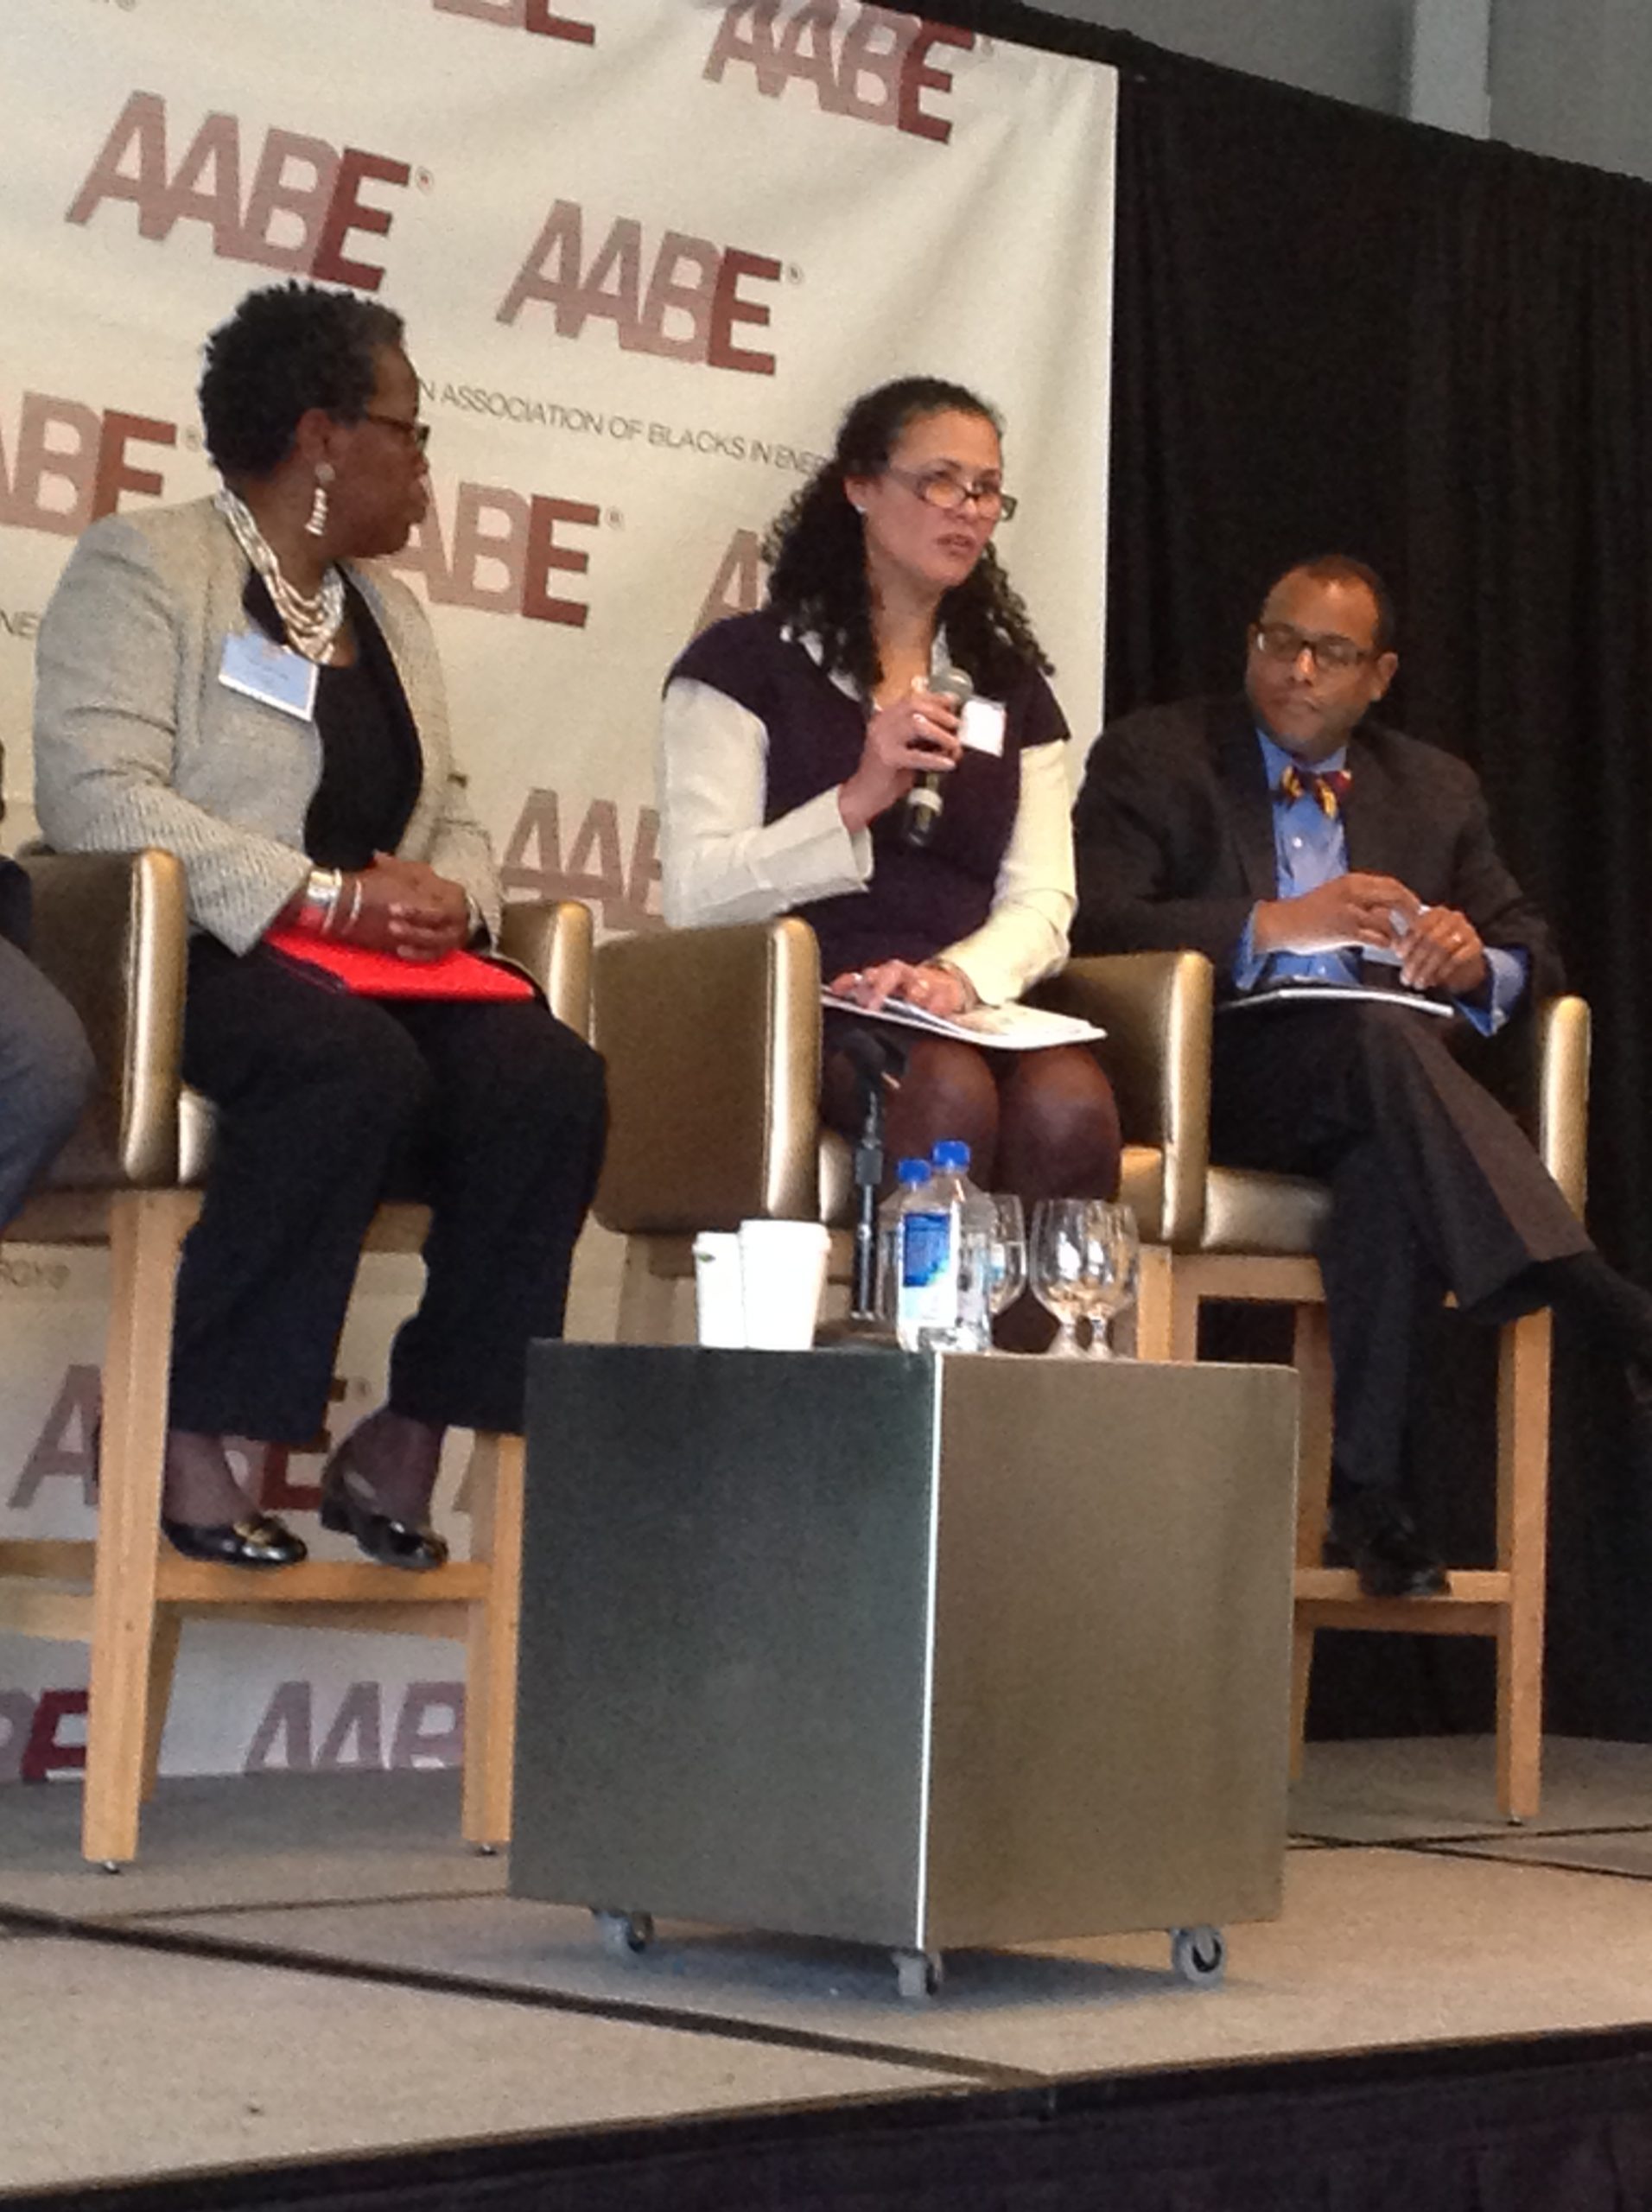 NASA, Women in Power, Students and Entrepreneurs Convene for AABE